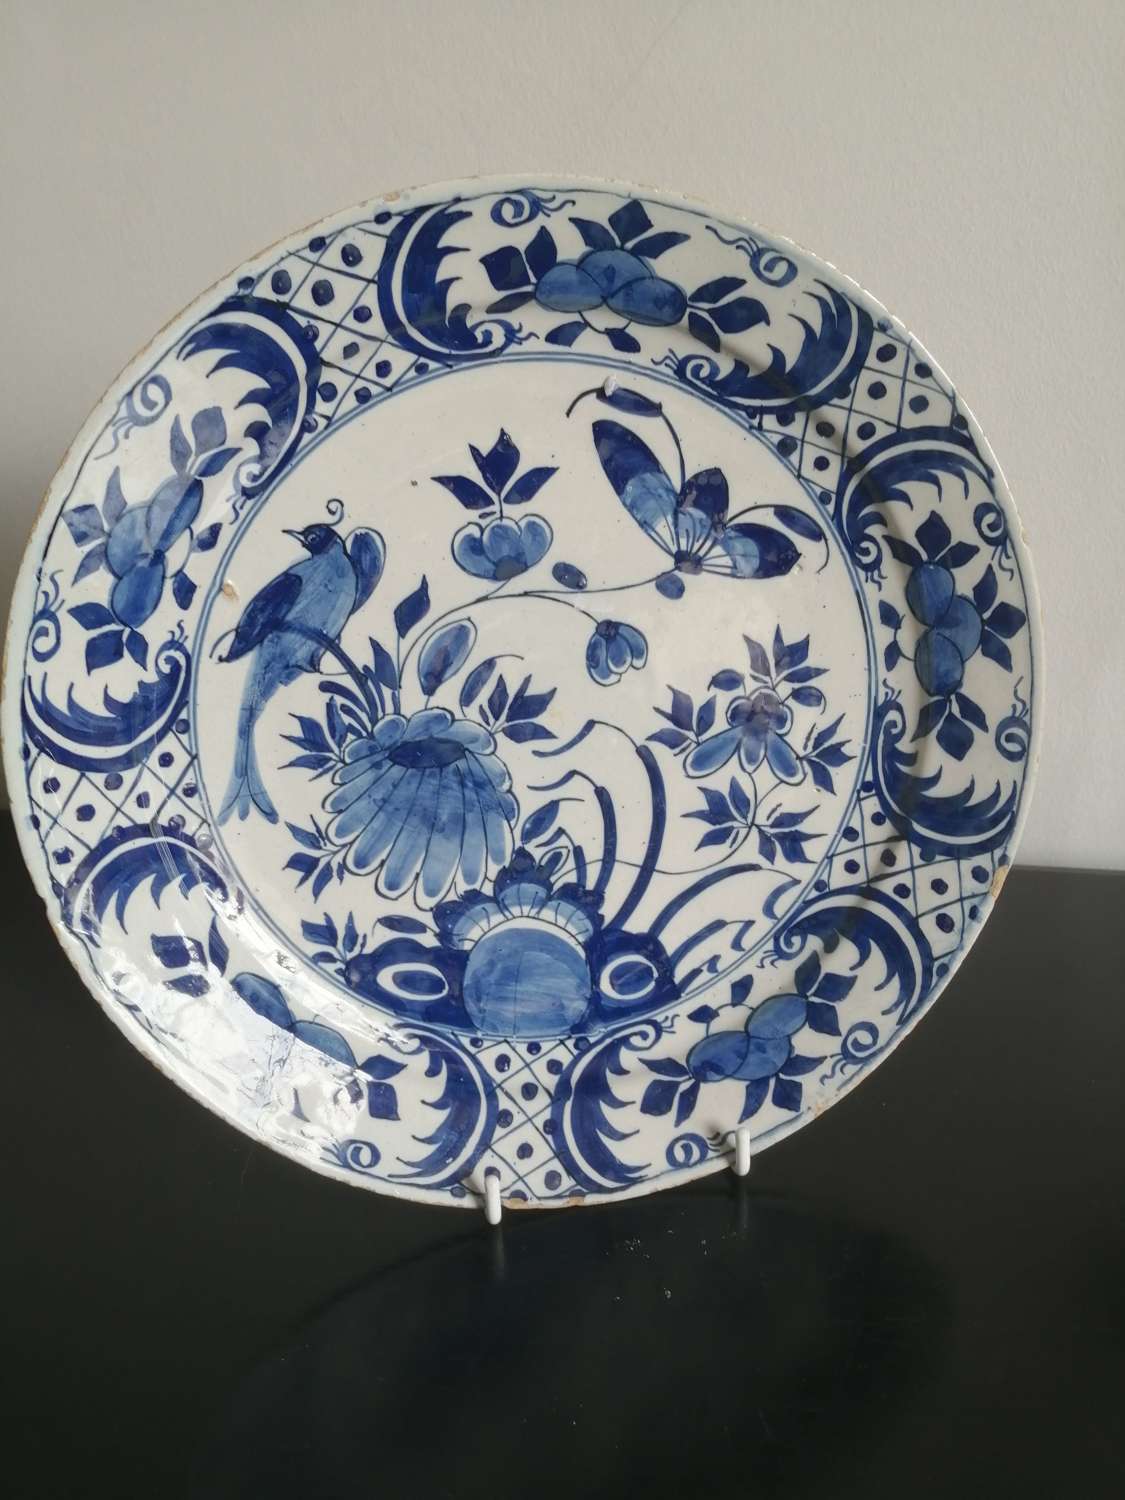 A lovely 18th century Dutch Delft blue & white plate